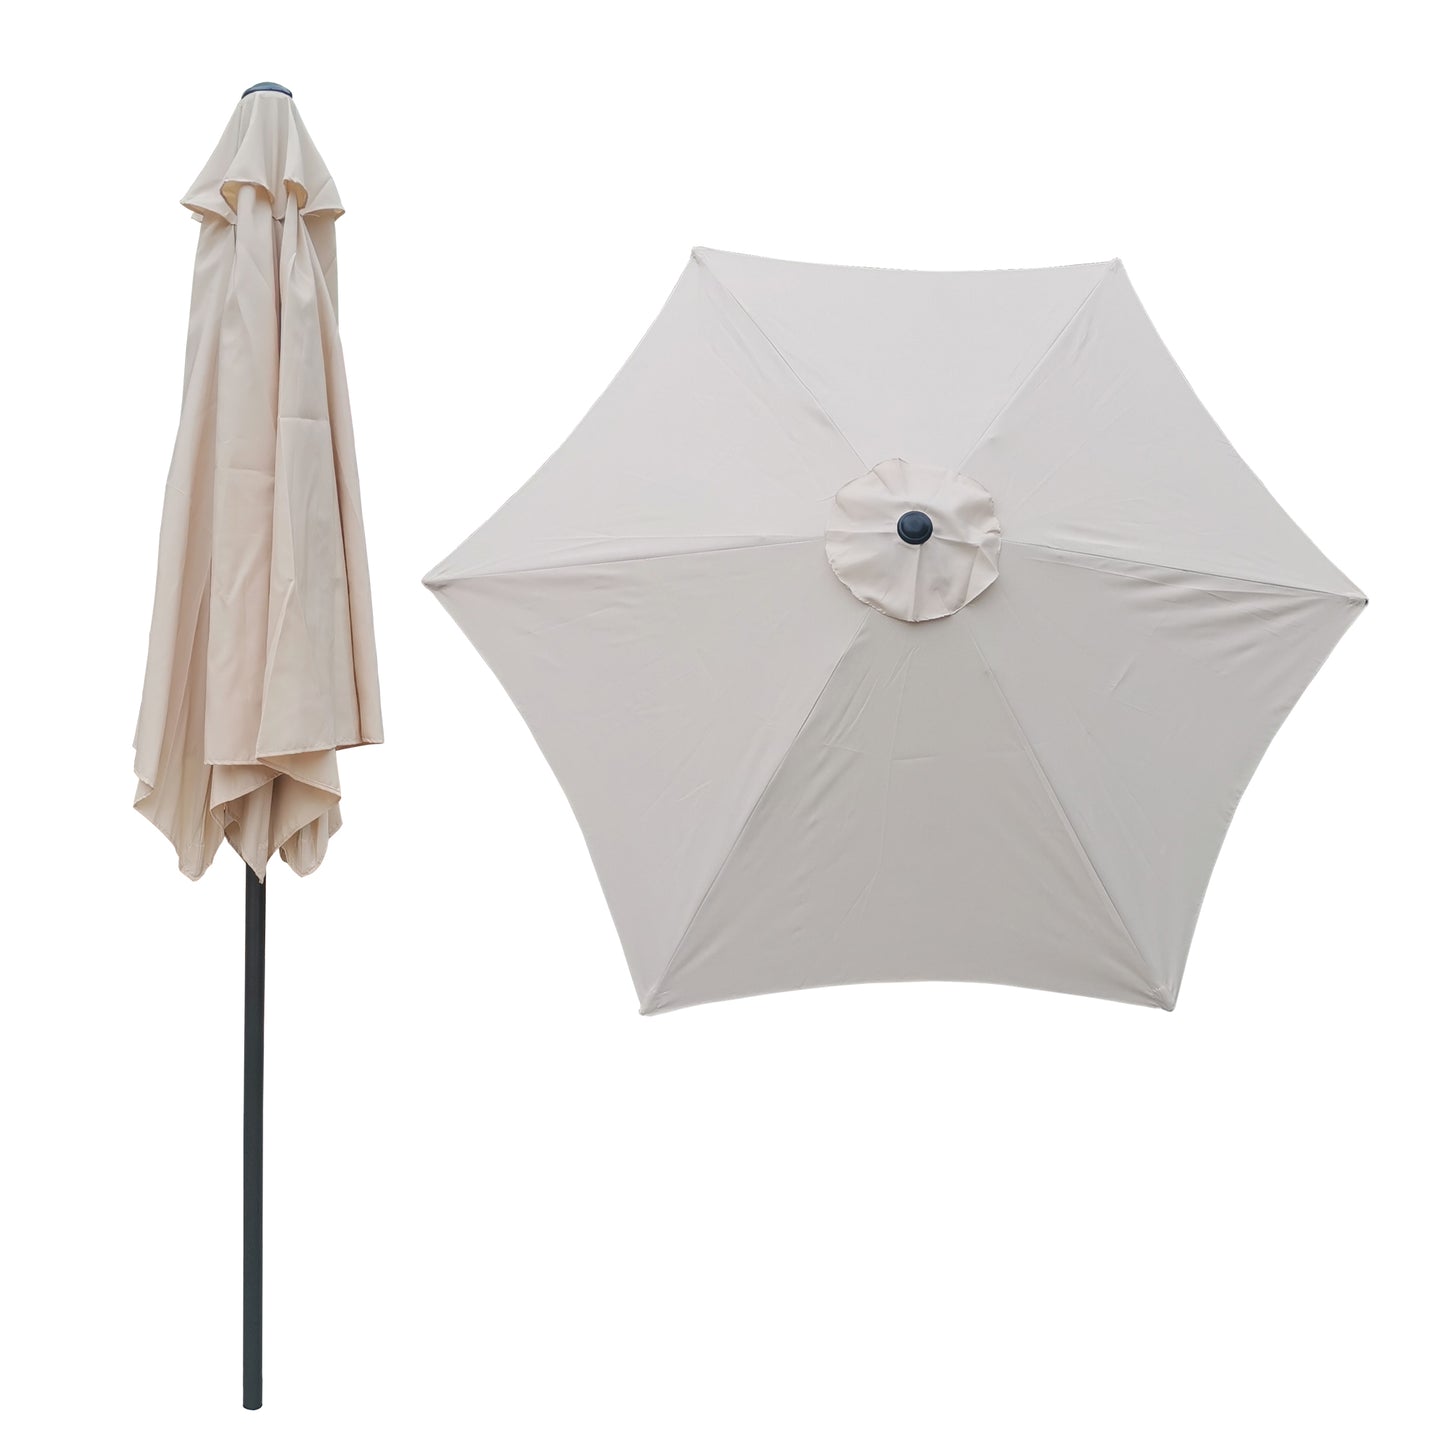 Weather-Resistant, Polyester Canopy Aluminum Pole